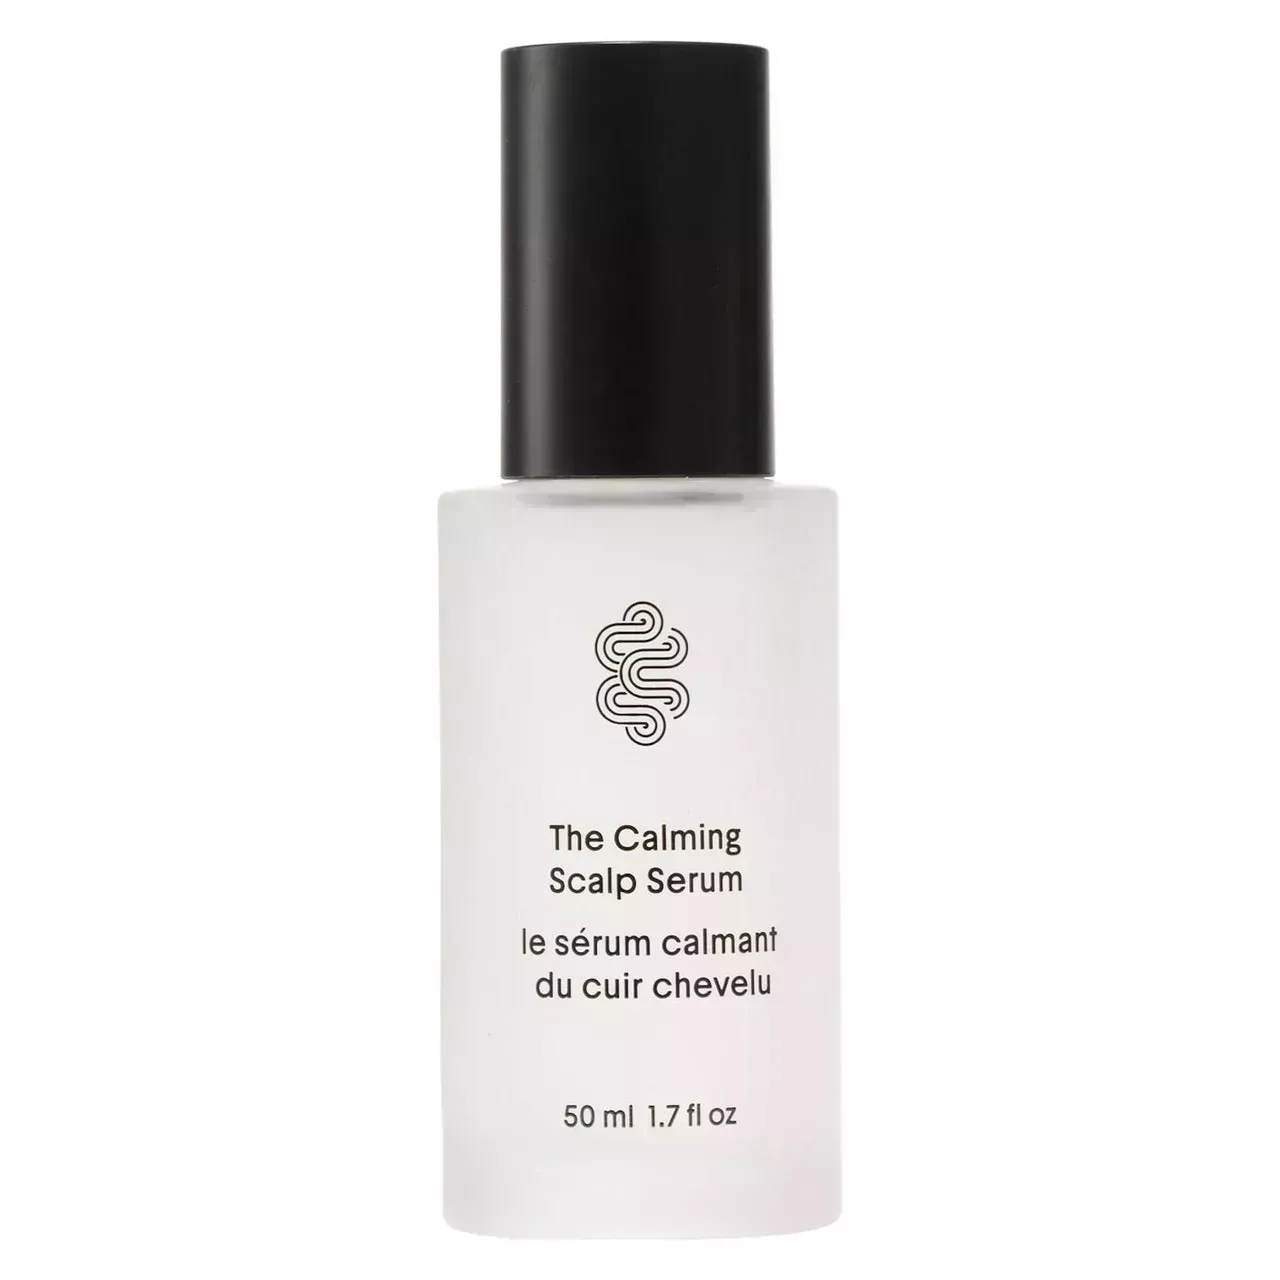 Crown Affair The Calming Scalp Serum for Dry & Sensitive Scalp cloudy transparent serum bottle with black cap on white background